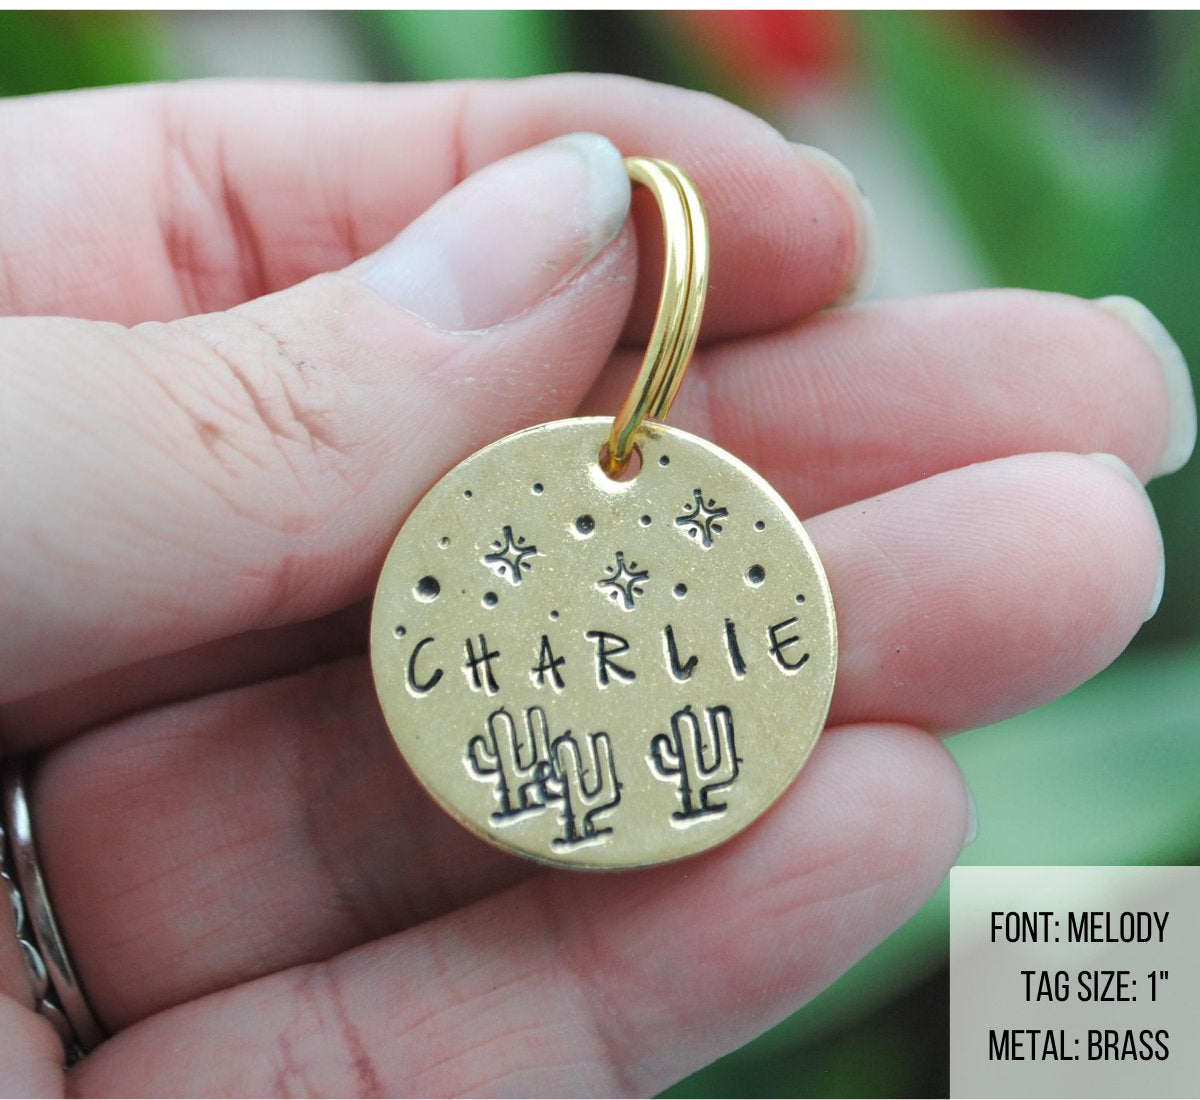 Personalized Dog Tag - Cactus and Stars Hand Stamped Dog Tag - Cat ID Tag - Dog Collar Tag - Custom Dog Tag - Pet ID Tag - Metal Pet Tag - Name Tag - Gift for Her - Cacti - Cactus Dog Tag - Dog Gear - Dog Accessories - Pet Accessories